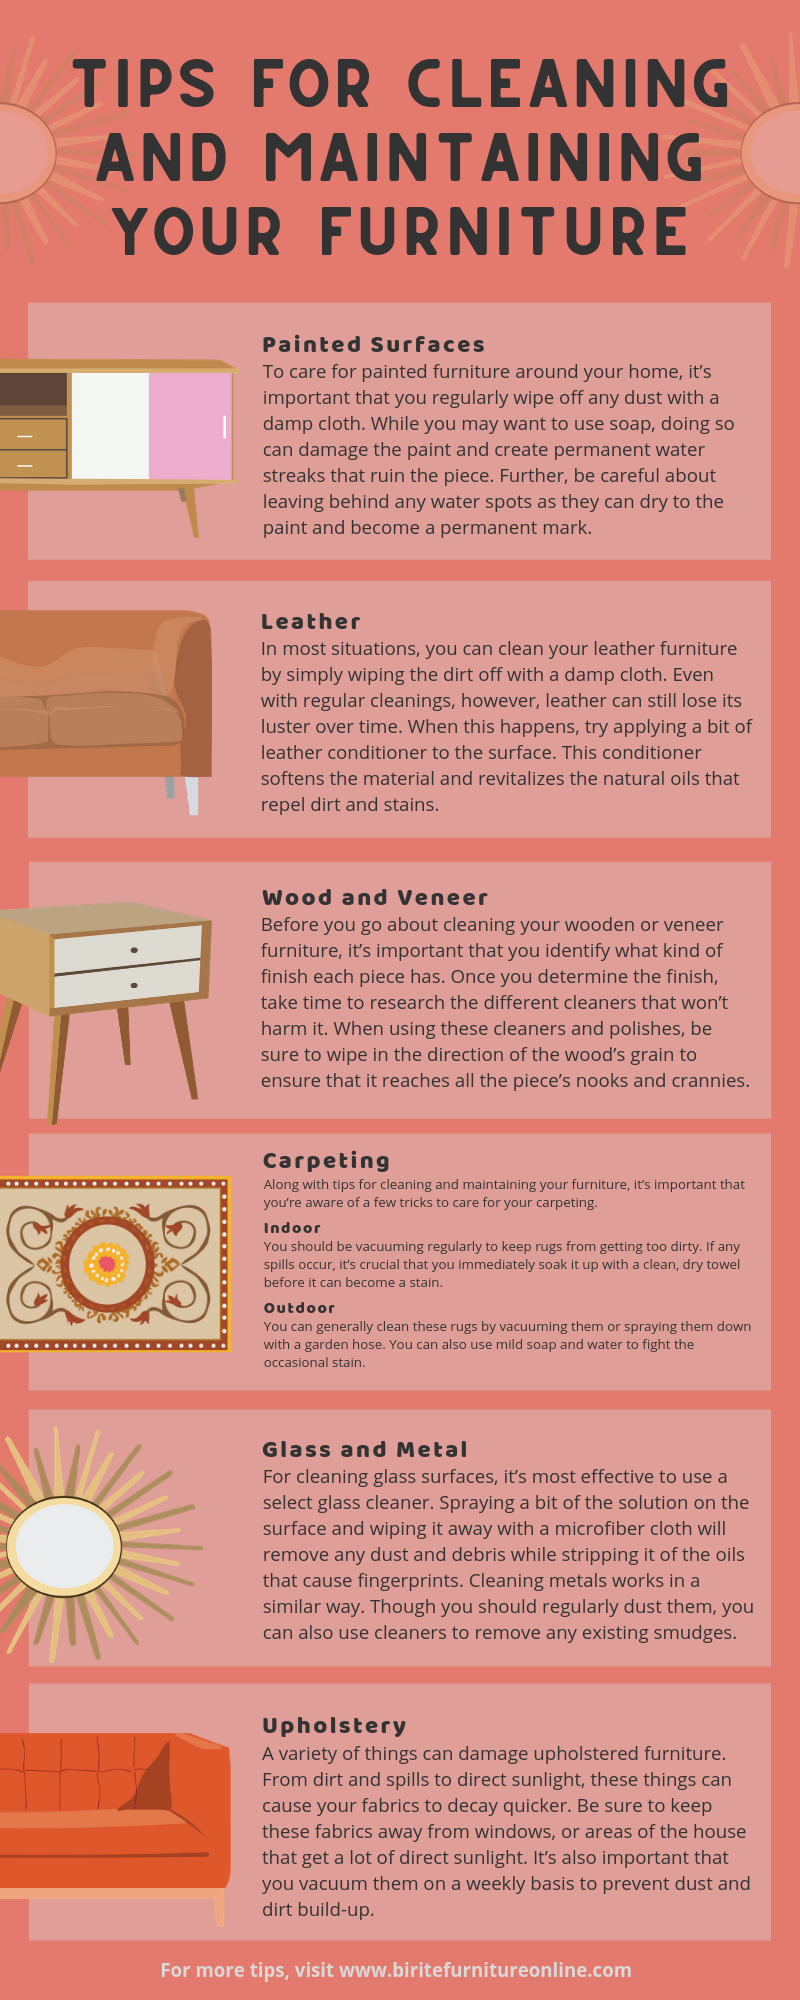 Tips for Cleaning and Maintaining Furniture infographic